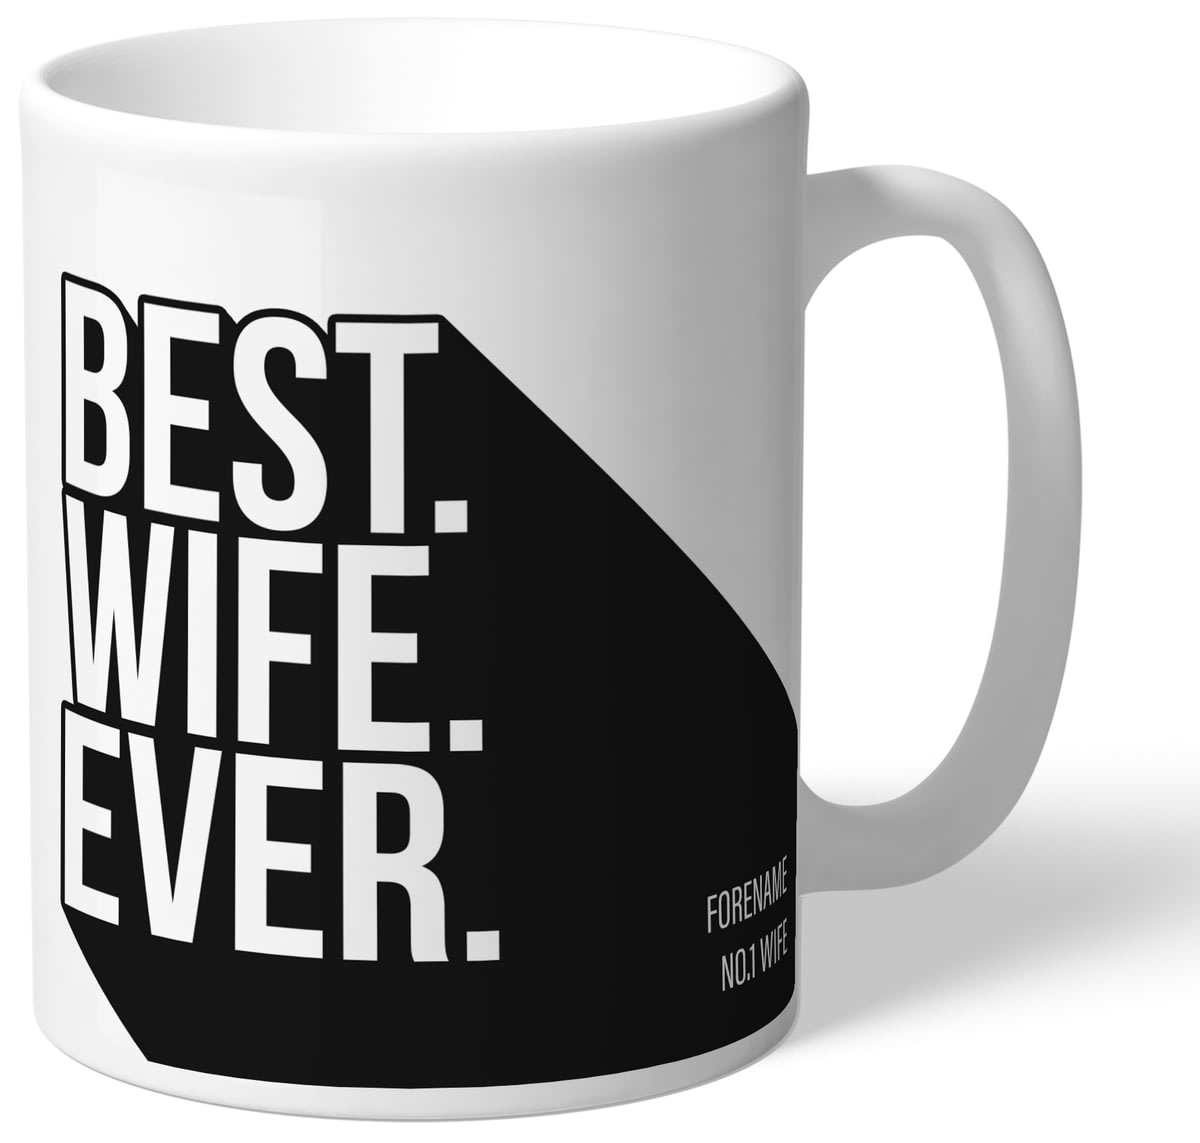 derby wife gifts